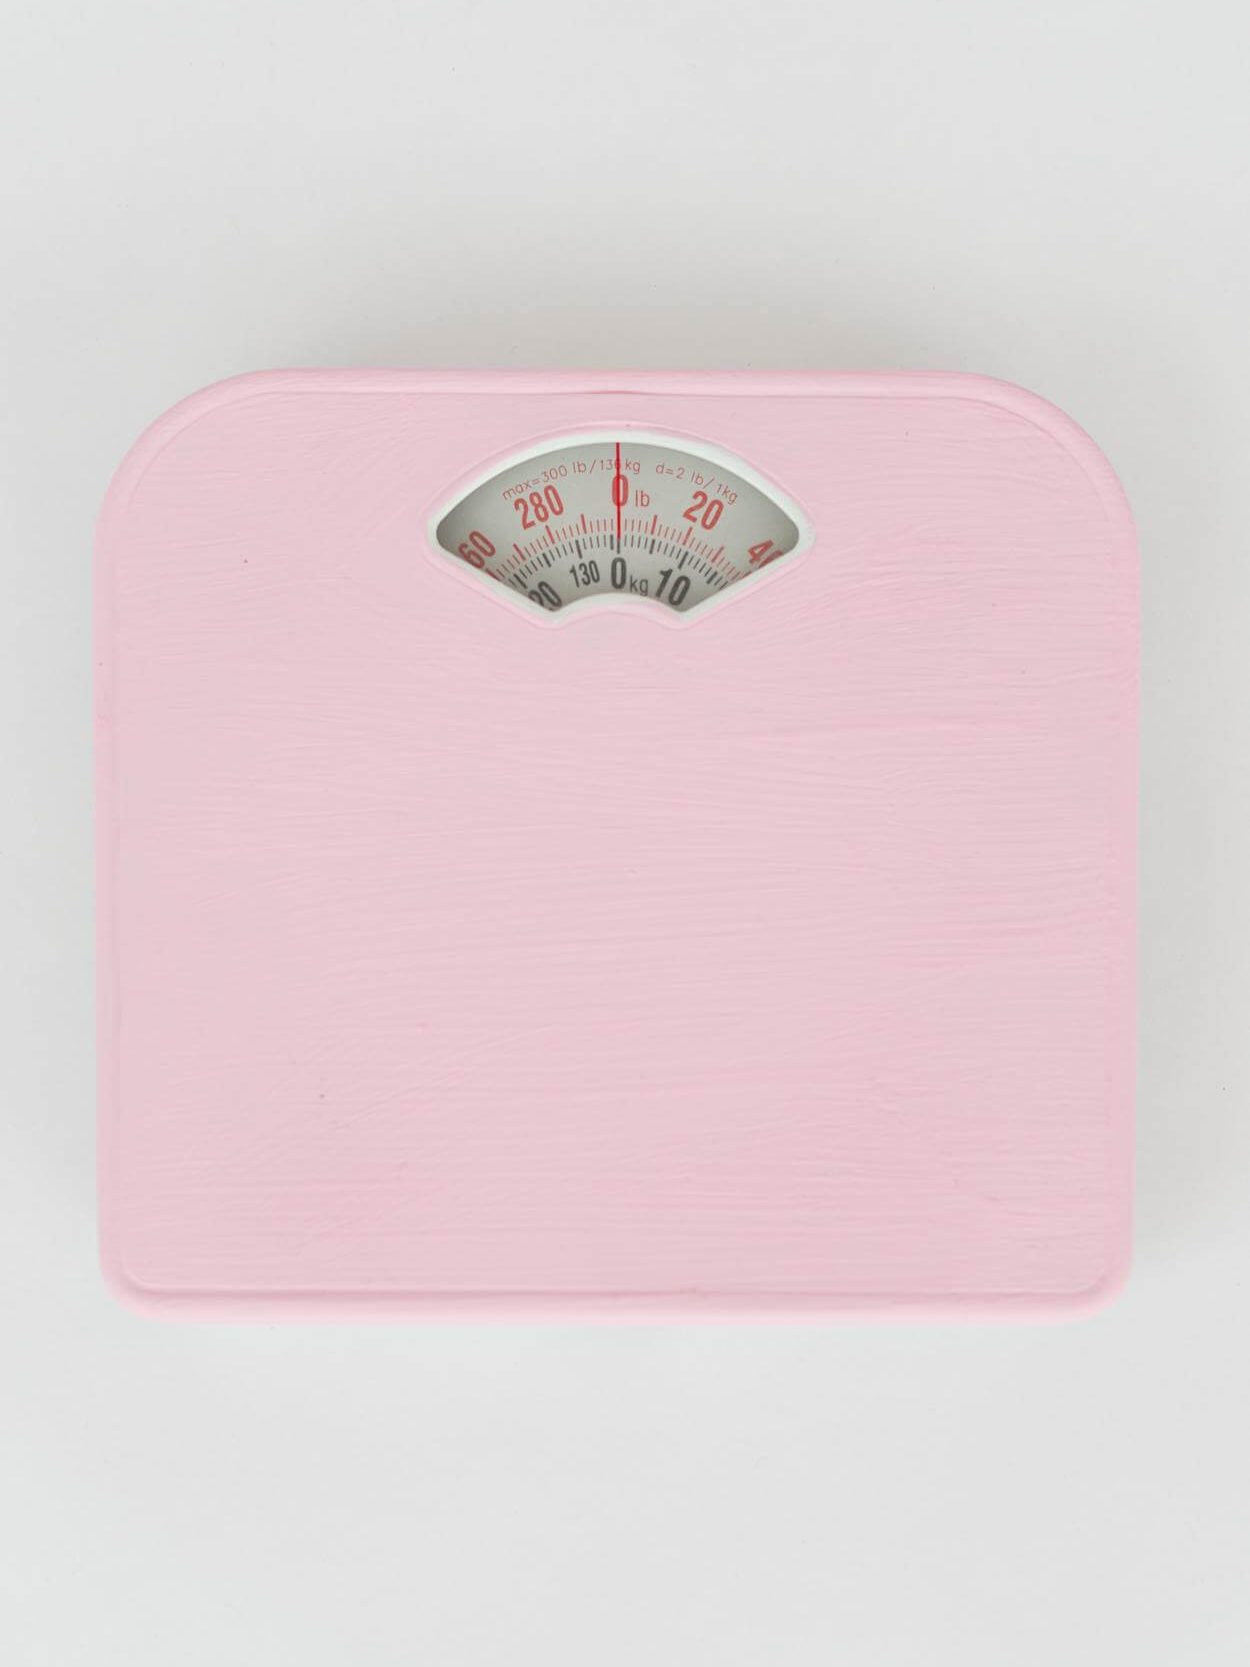 weighing scale.